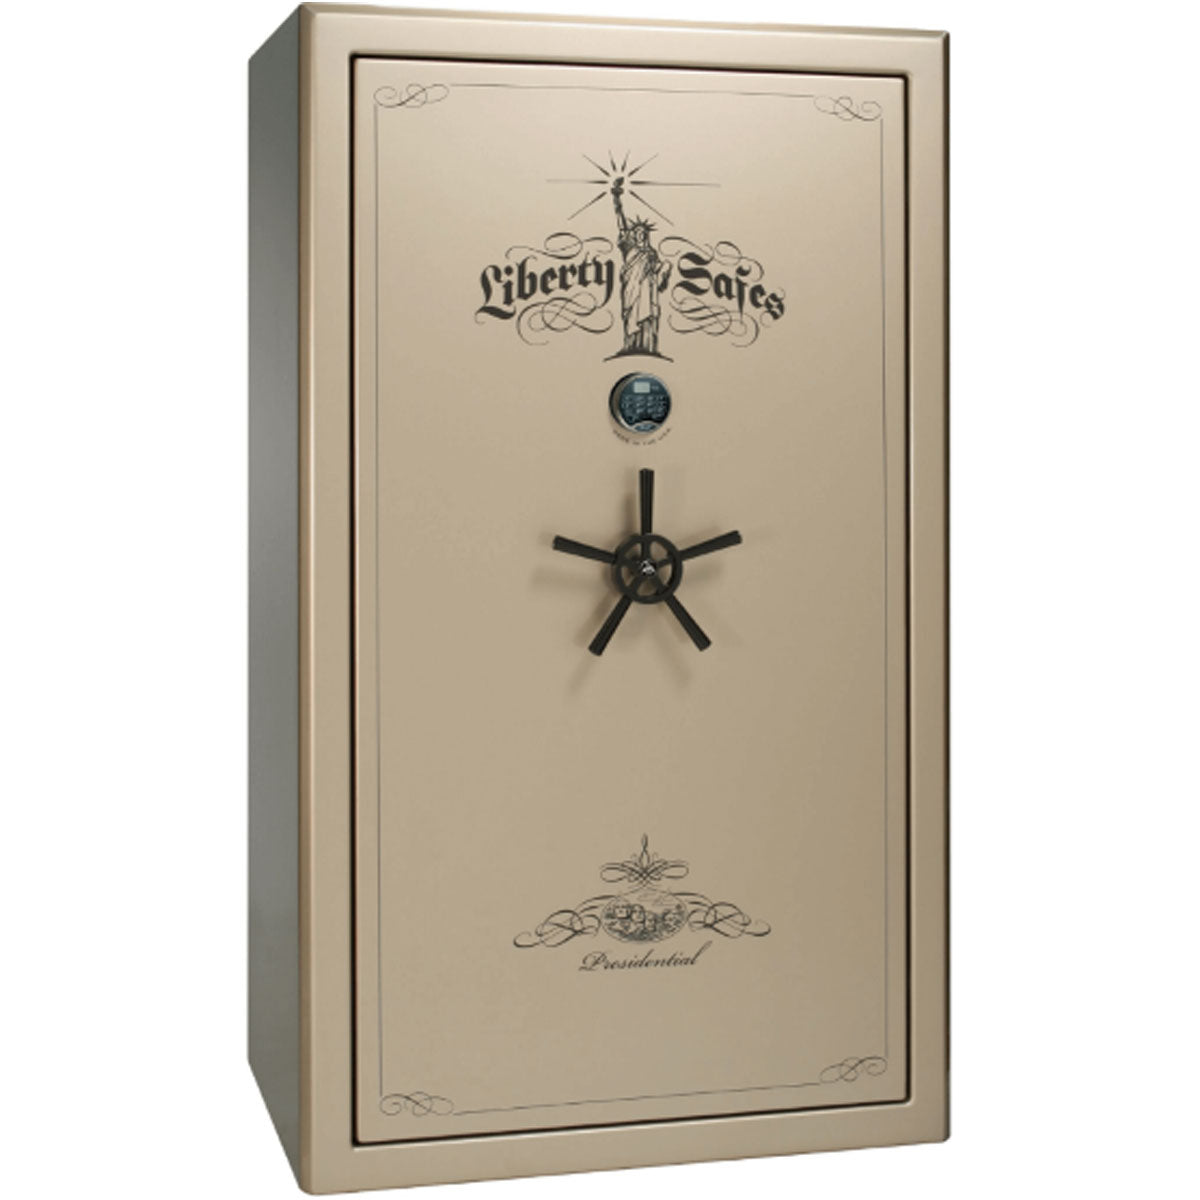 Liberty Safe Presidential 50 in Champagne Gloss with Black Chrome Electronic Lock, closed door.